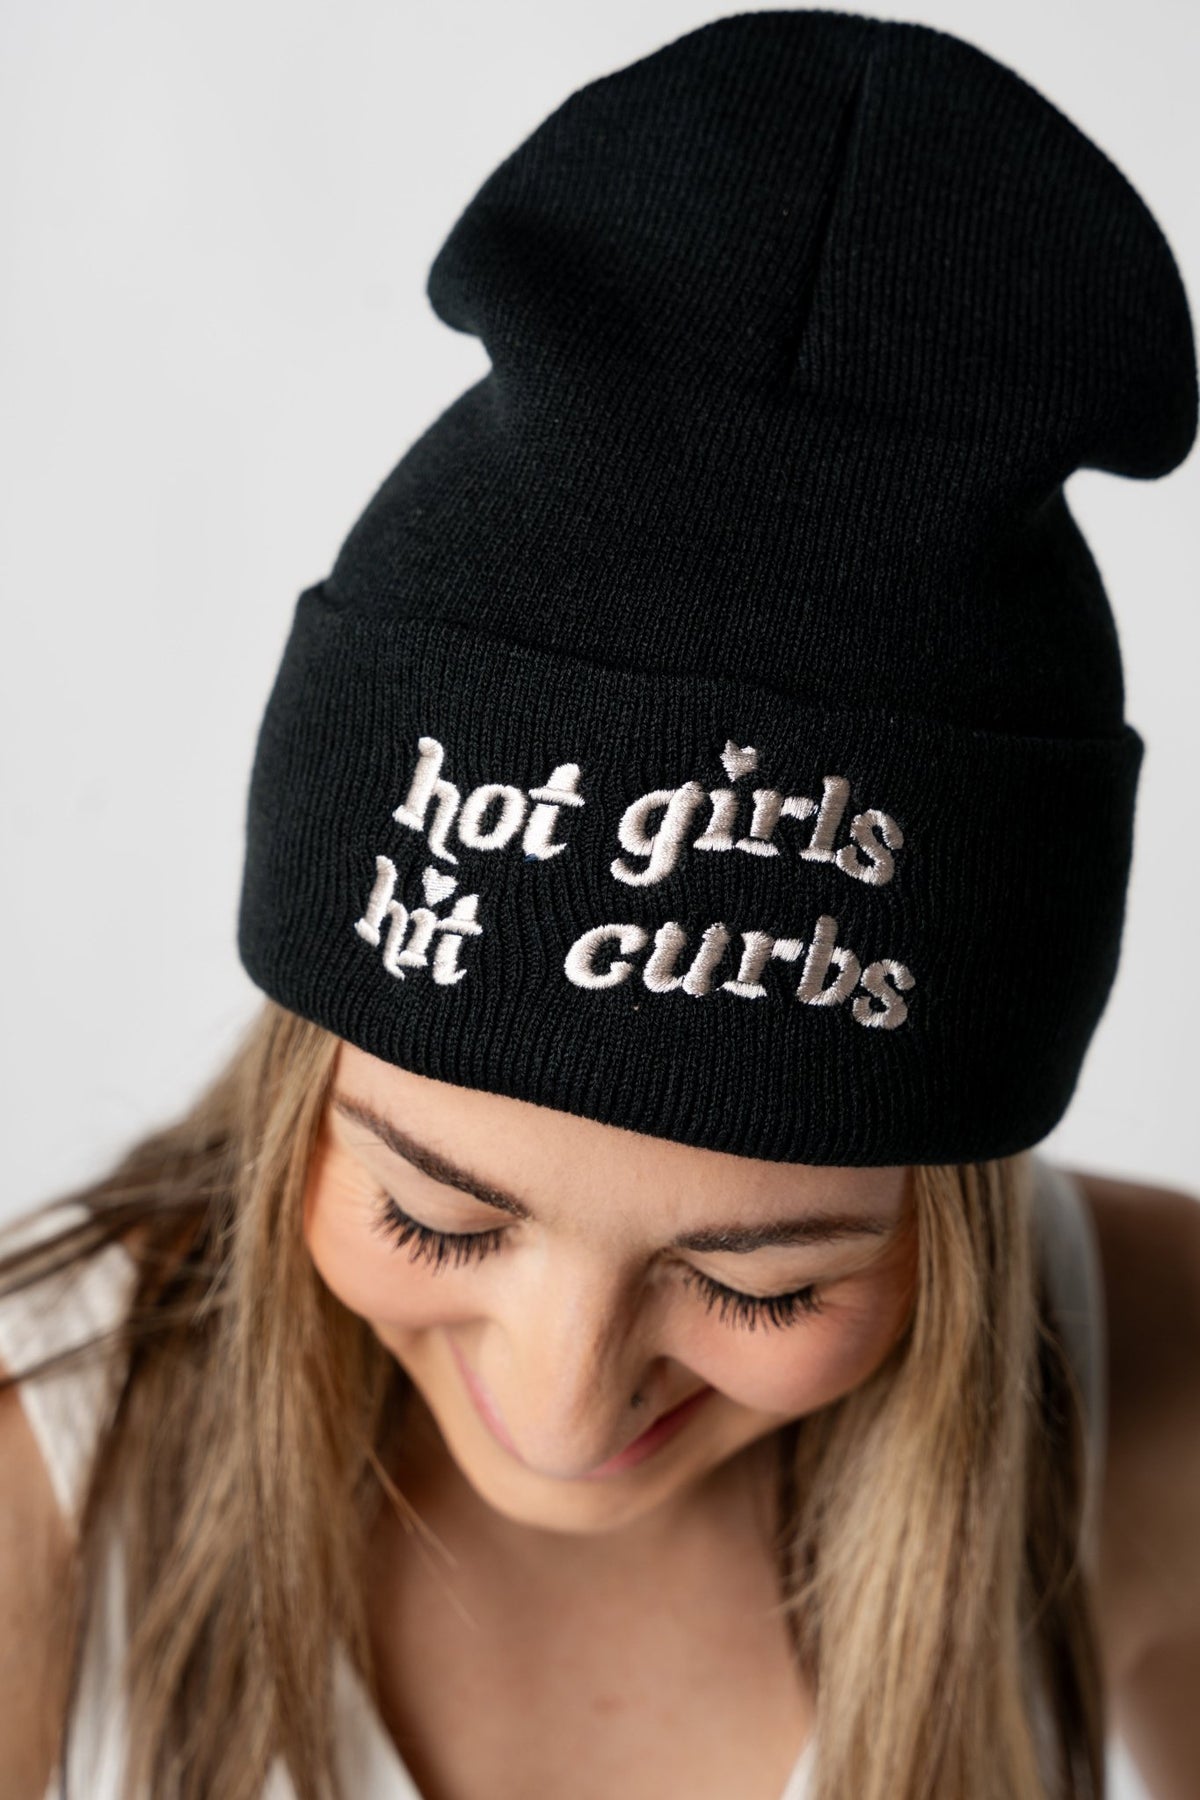 Hot girls hit curbs beanie black - Trendy Beanies at Lush Fashion Lounge Boutique in Oklahoma City